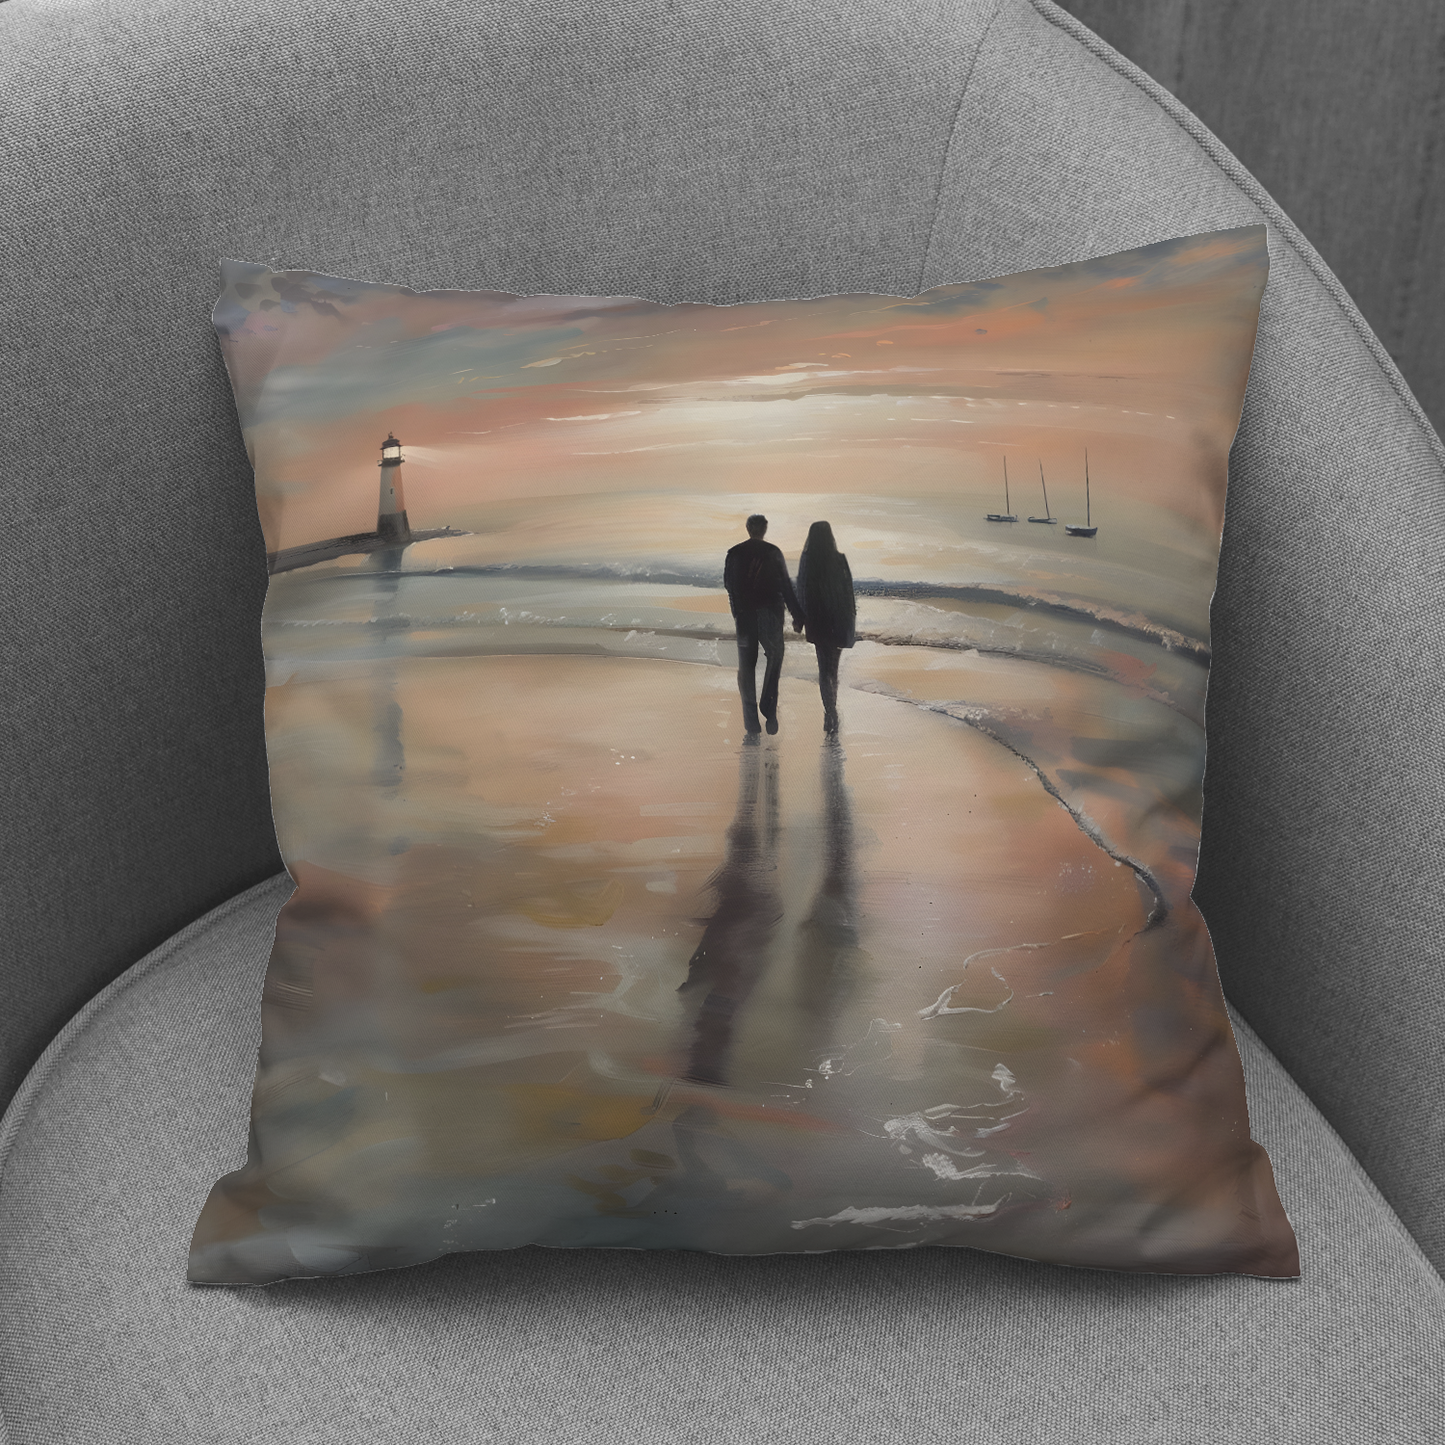 Sunset's Promise  Hand Made Poly Linen Cushions